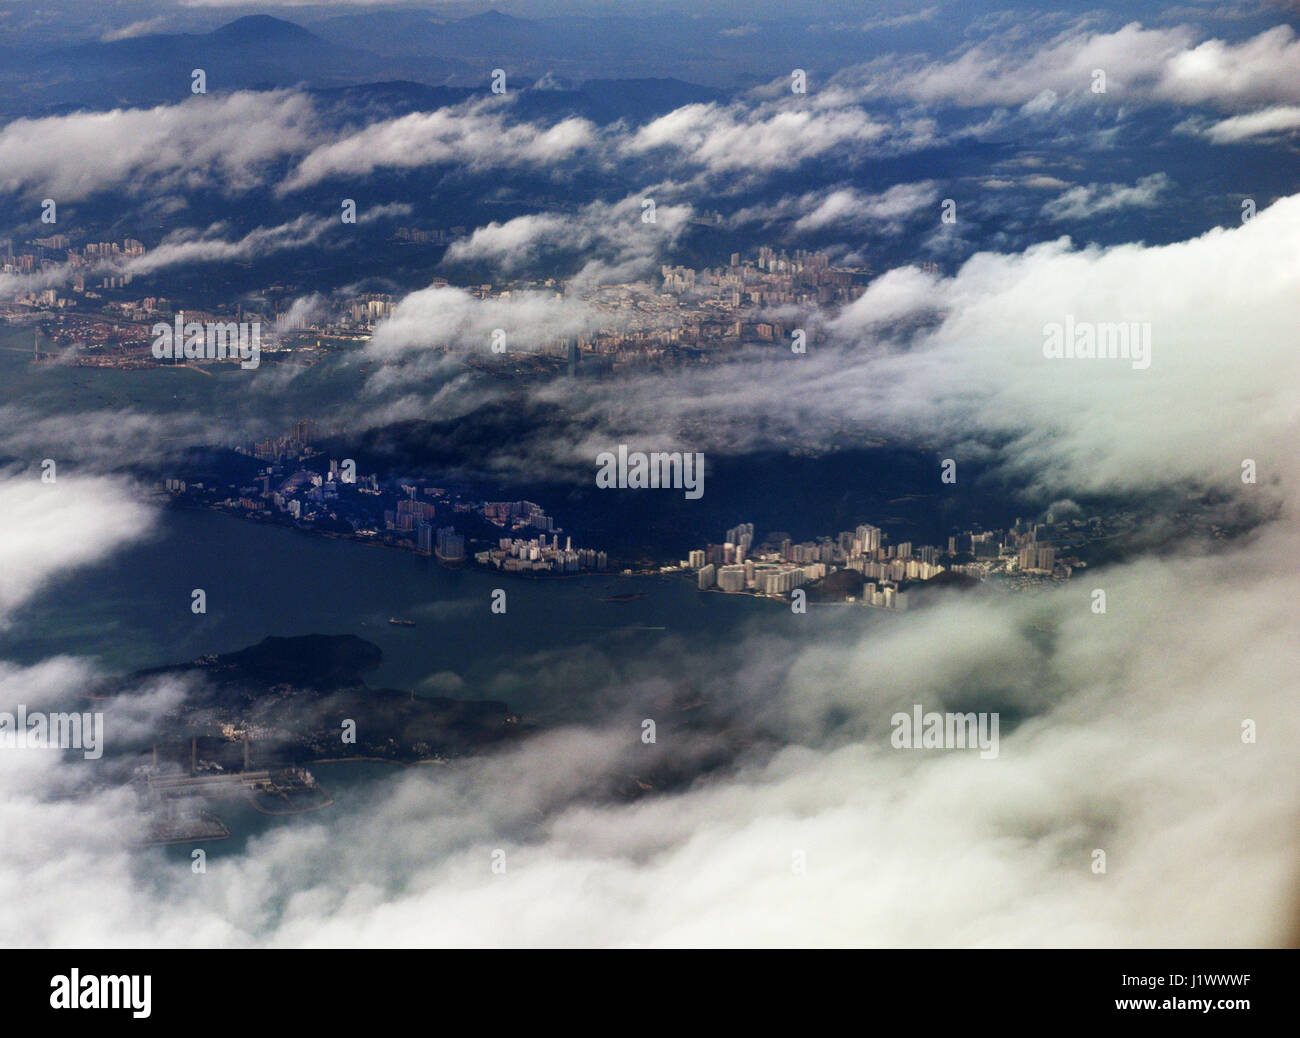 An aerial view of Hong Kong Island's South Side and Kowloon. Stock Photo